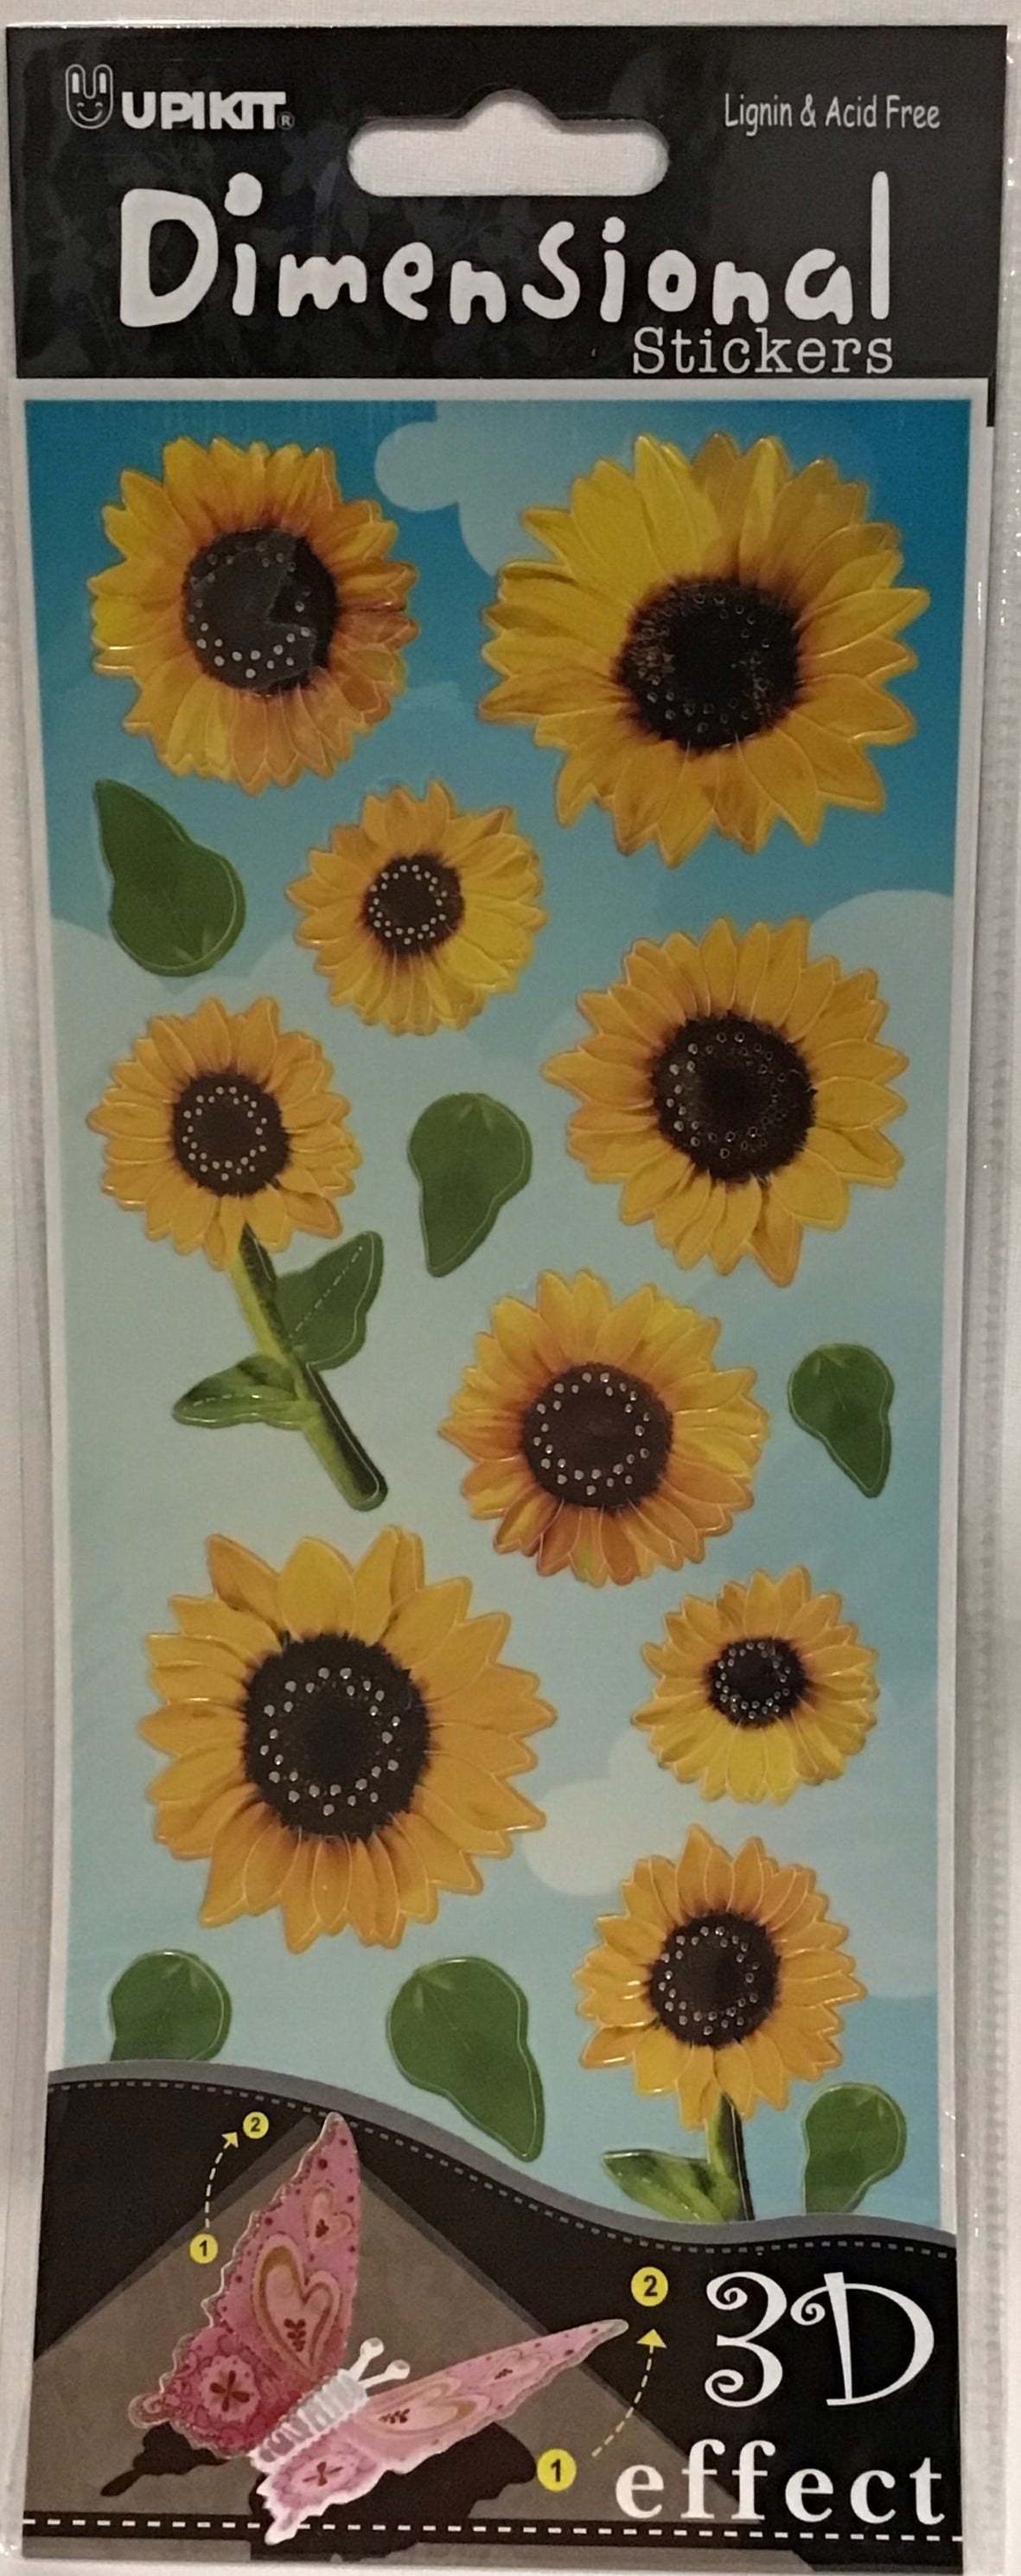 Upikit 3D Dimensional Stickers - Sunflowers and Leaves -  17 pce